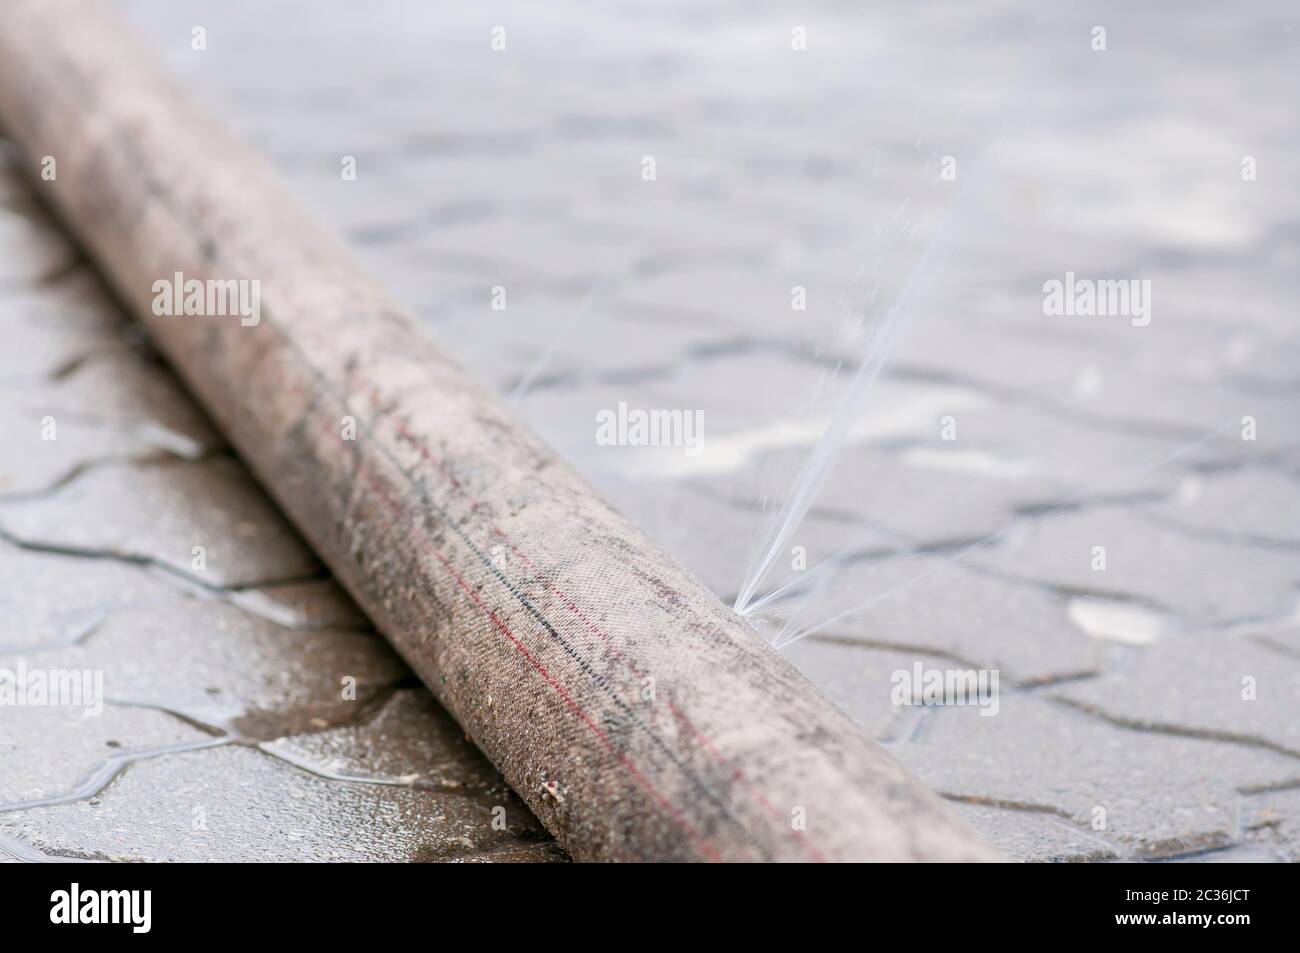 Leaky fire hose to extinguish fire, water is spilled, a ruptured hose. Stock Photo